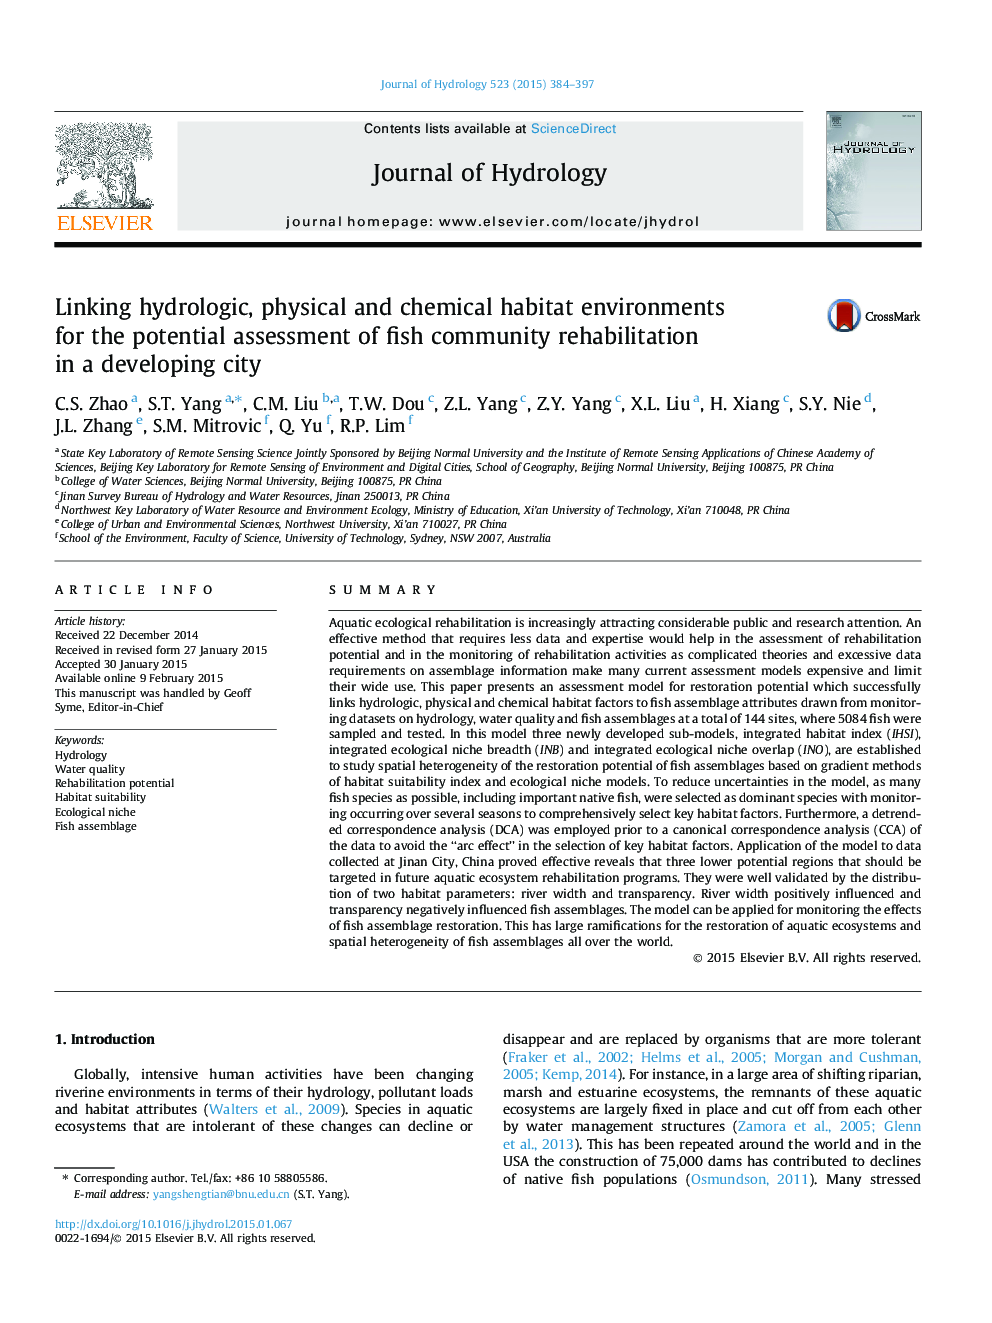 Linking hydrologic, physical and chemical habitat environments for the potential assessment of fish community rehabilitation in a developing city